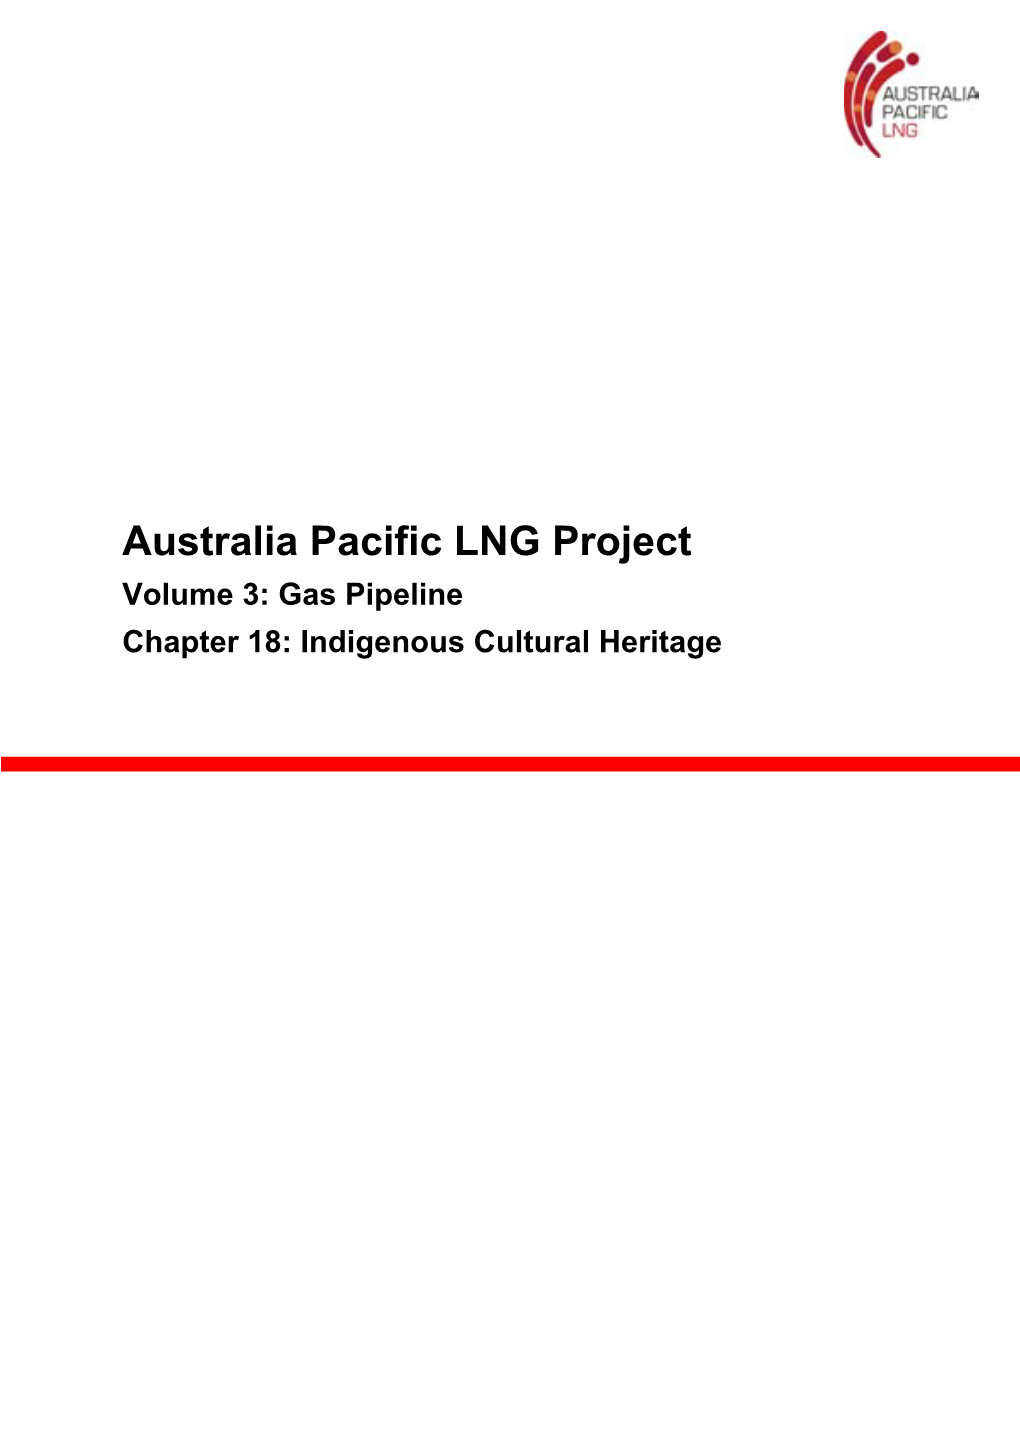 Australia Pacific LNG Project Volume 3: Gas Pipeline Chapter 18: Indigenous Cultural Heritage